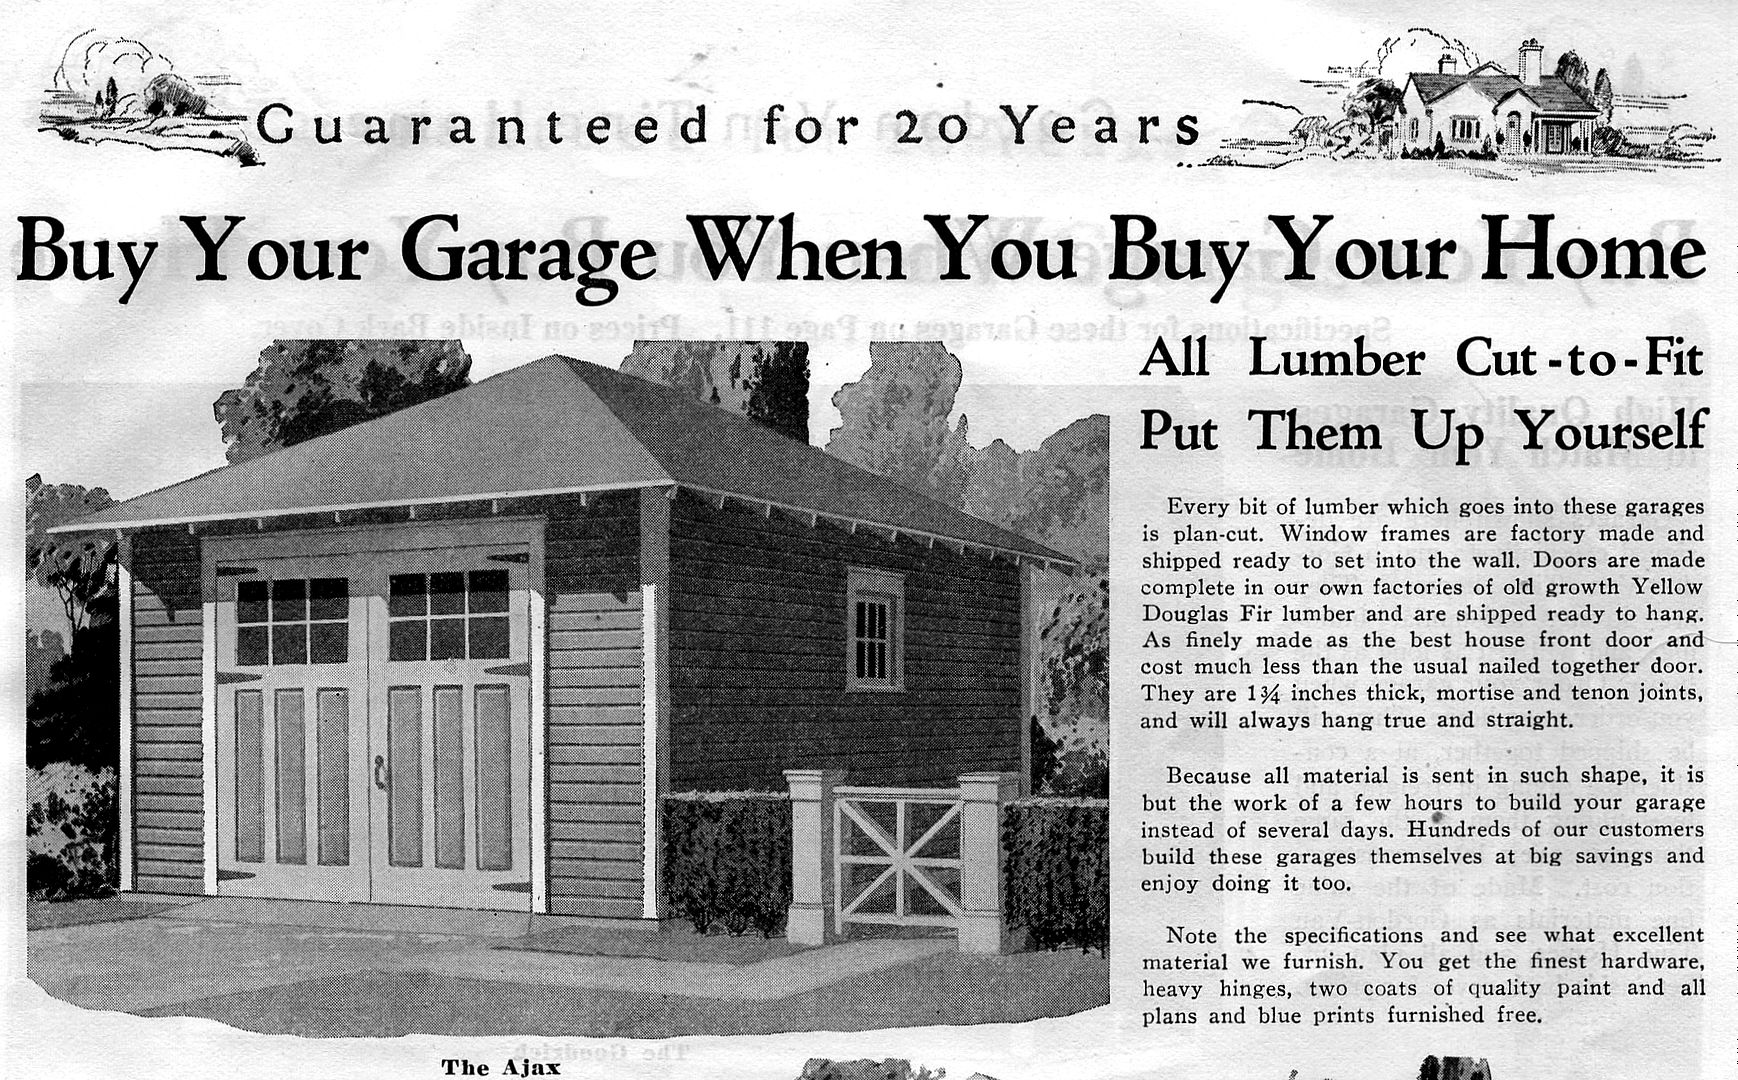 And tucked away behind the house is a Gordon Van Tine garage. 